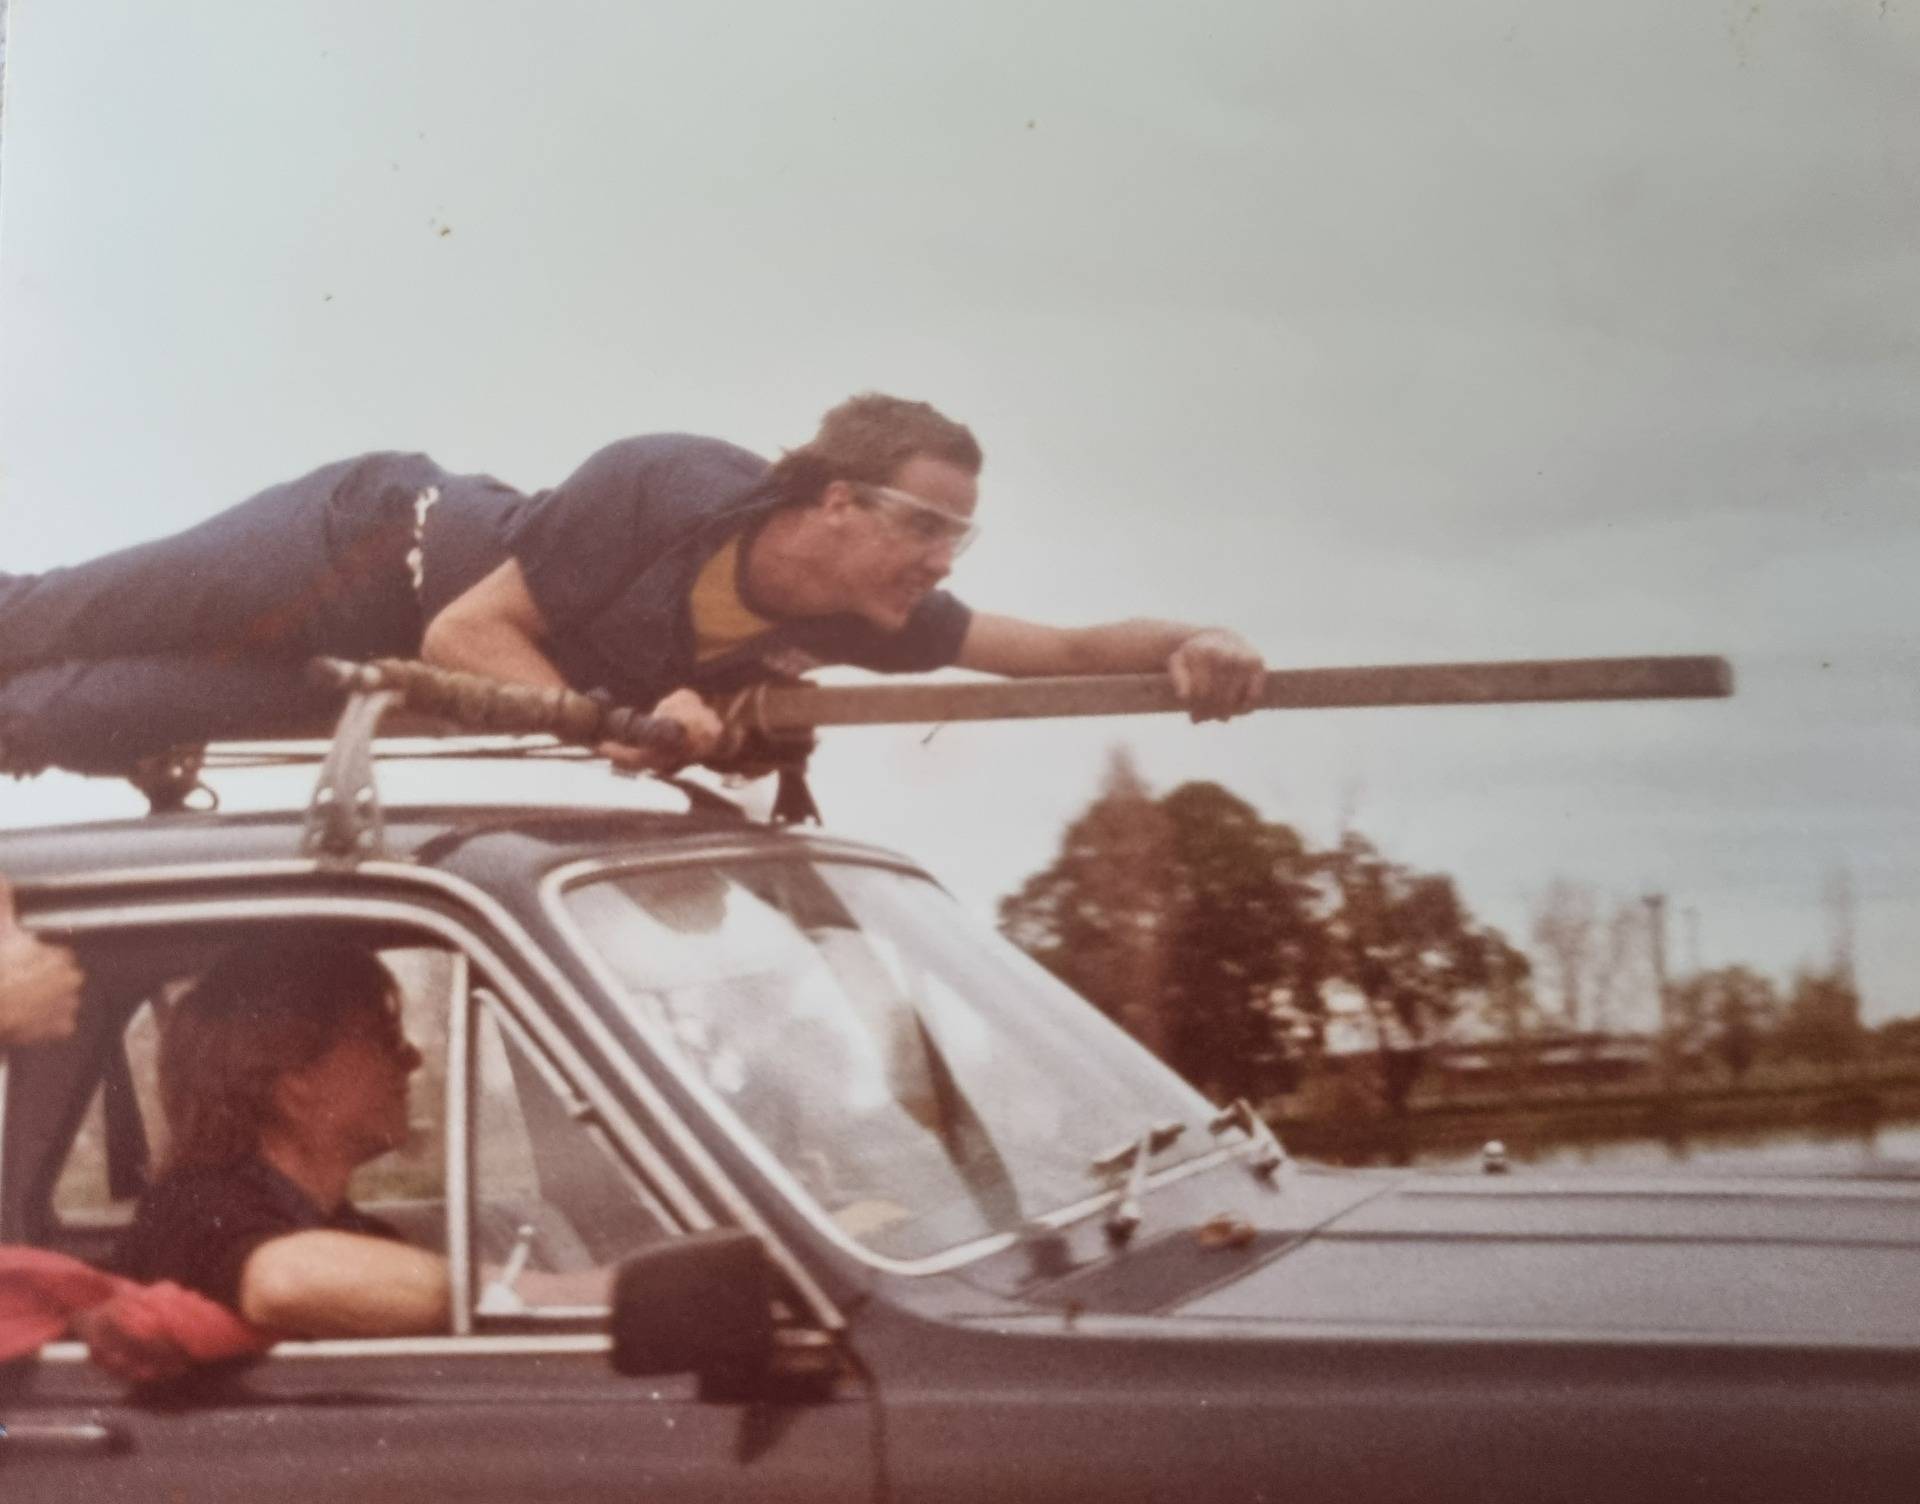 A bit of an old school apprentice initiation’s. A lap around the lake on top of the tradesman’s car, to get used to riding on top of lift cars. Even had the safety glasses back in the old days. LOL